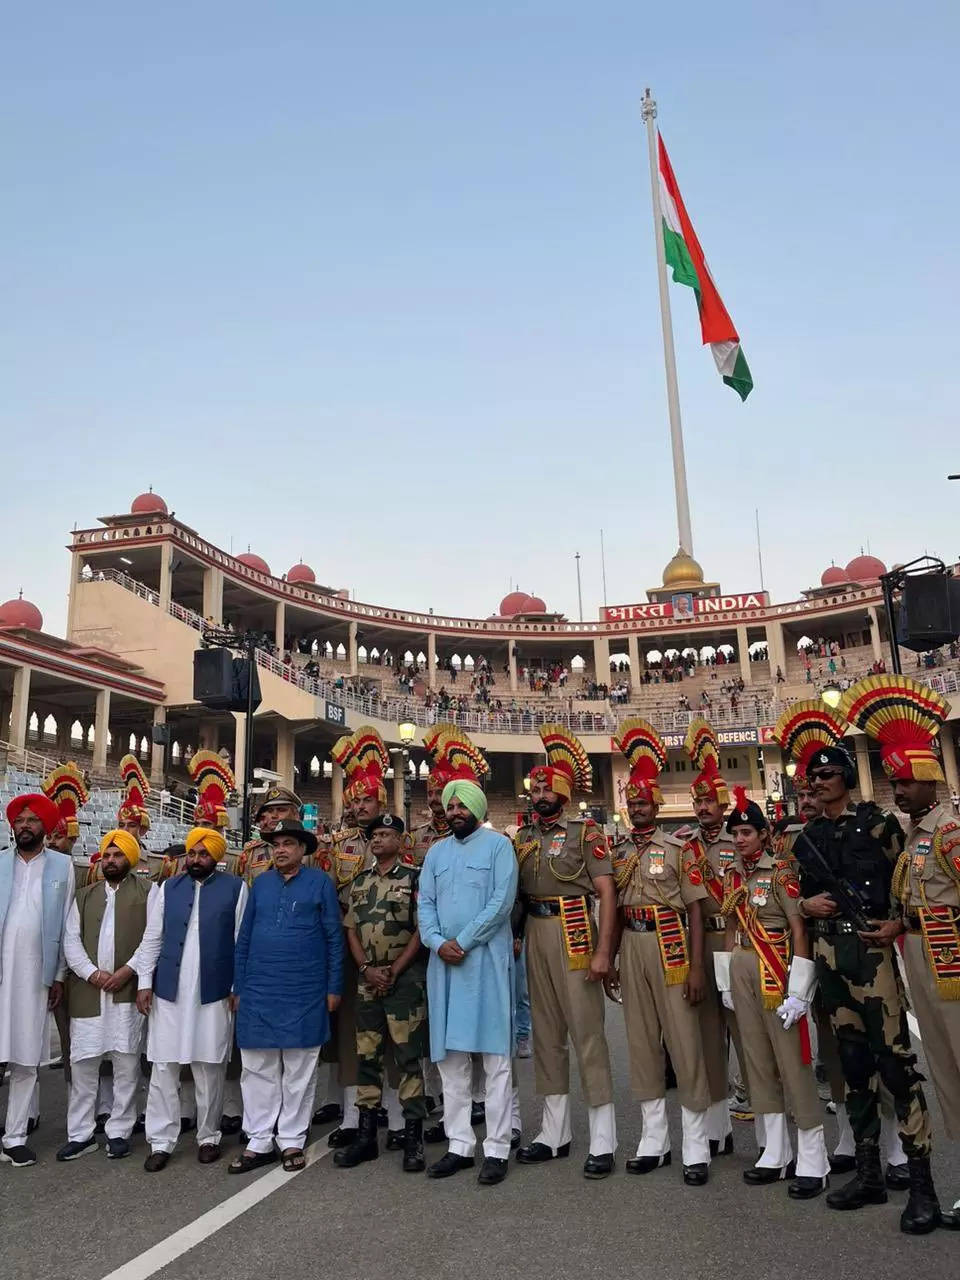 Minister of Road Transport and Highways Nitin Gadkari on Thursday inaugurated the highest national flag of 418 feet at the Attari-Wagah international border near here in Punjab.